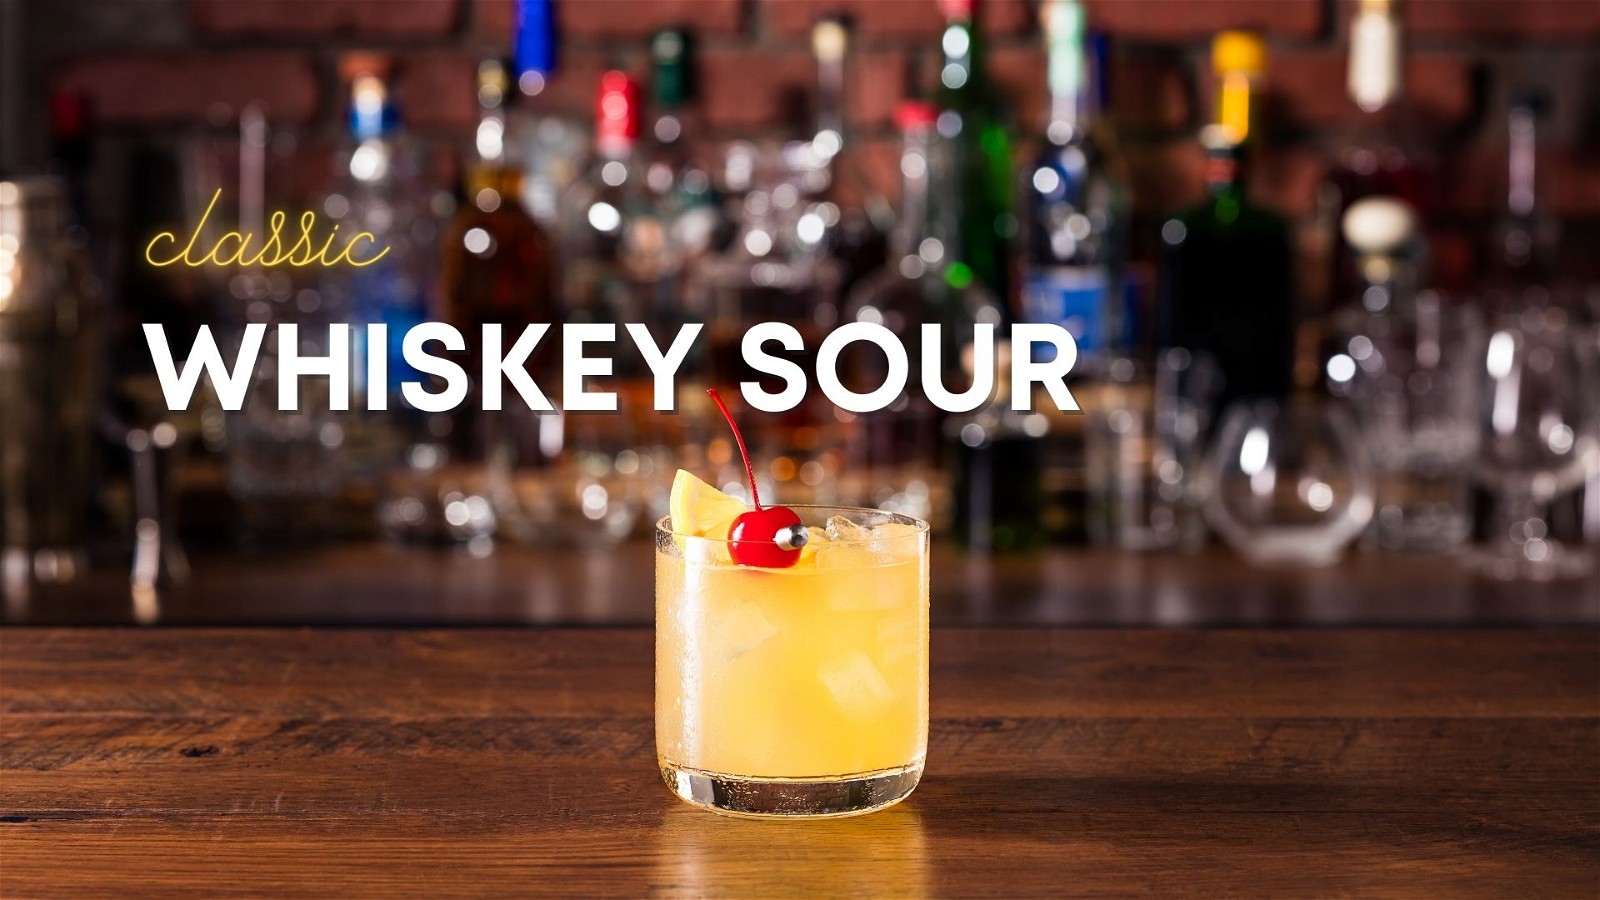 Image of Classic Whiskey Sour